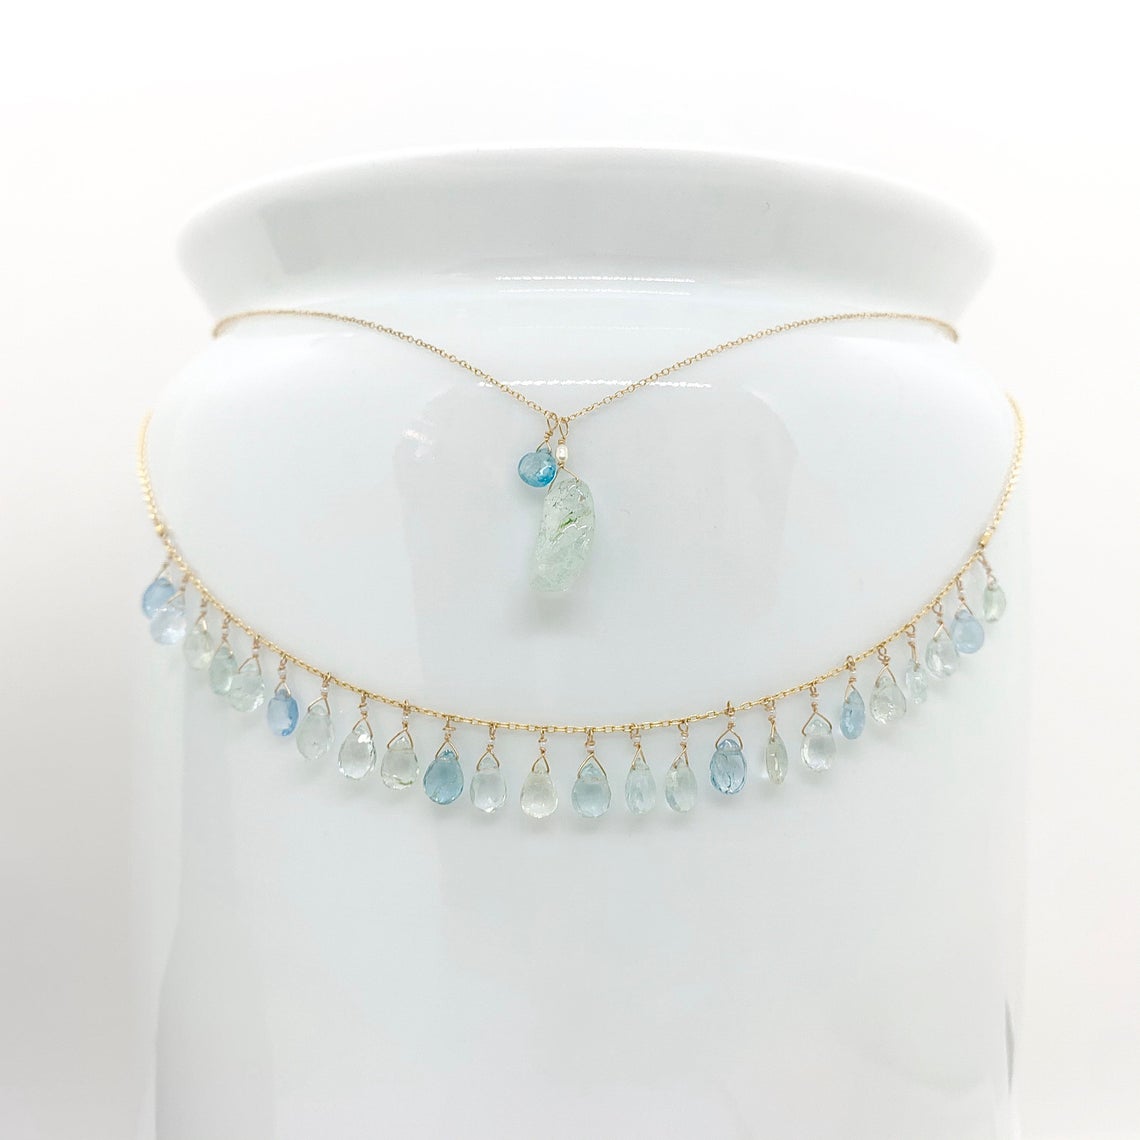 14k Gold Chain Necklace w/ Freshwater Pearl, Aquamarine, Antique Italian Beads & 18k Gold Nuggets